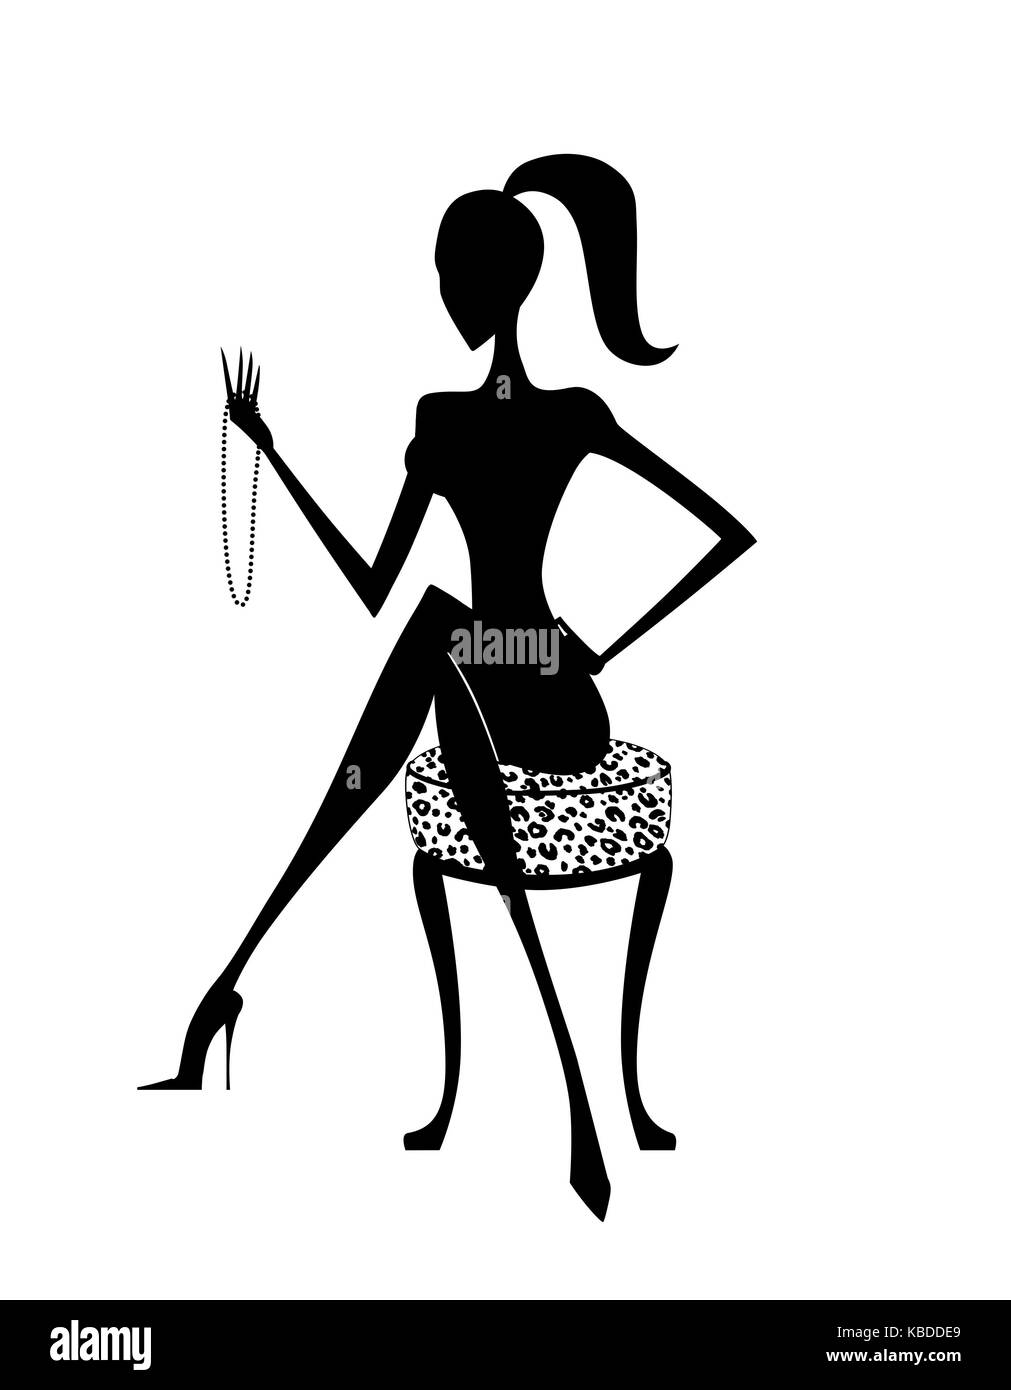 Fashion silhouette of a chic young woman seated on an animal print stool holding a pearl necklace Stock Photo